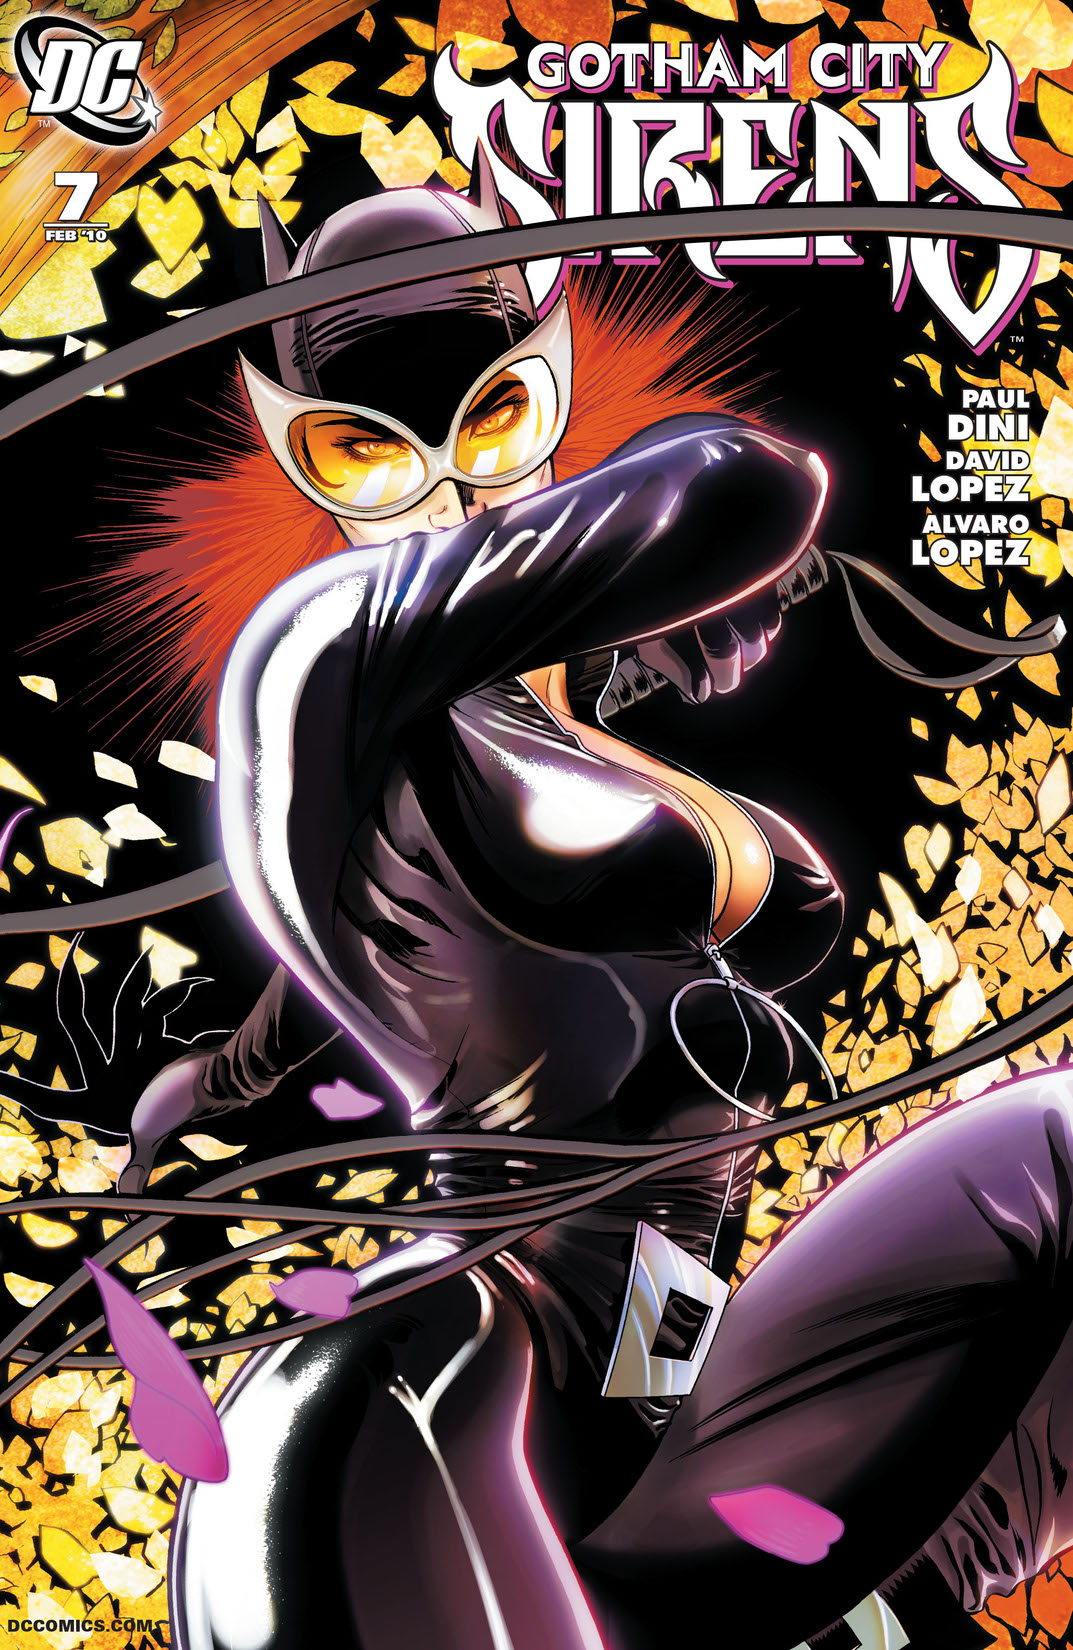 Gotham City Sirens #7 preview images